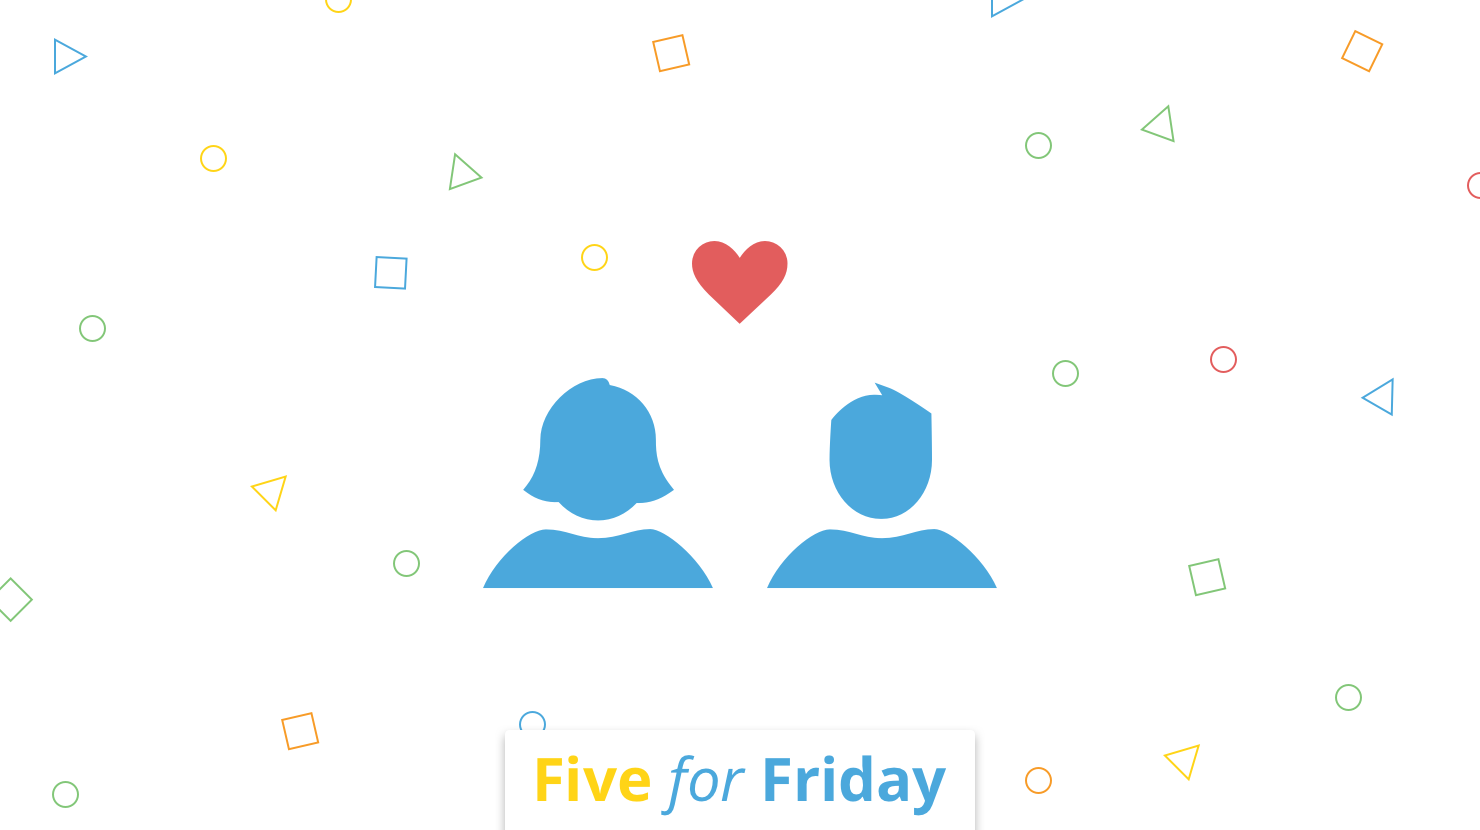 Five for Friday: Love in the workplace